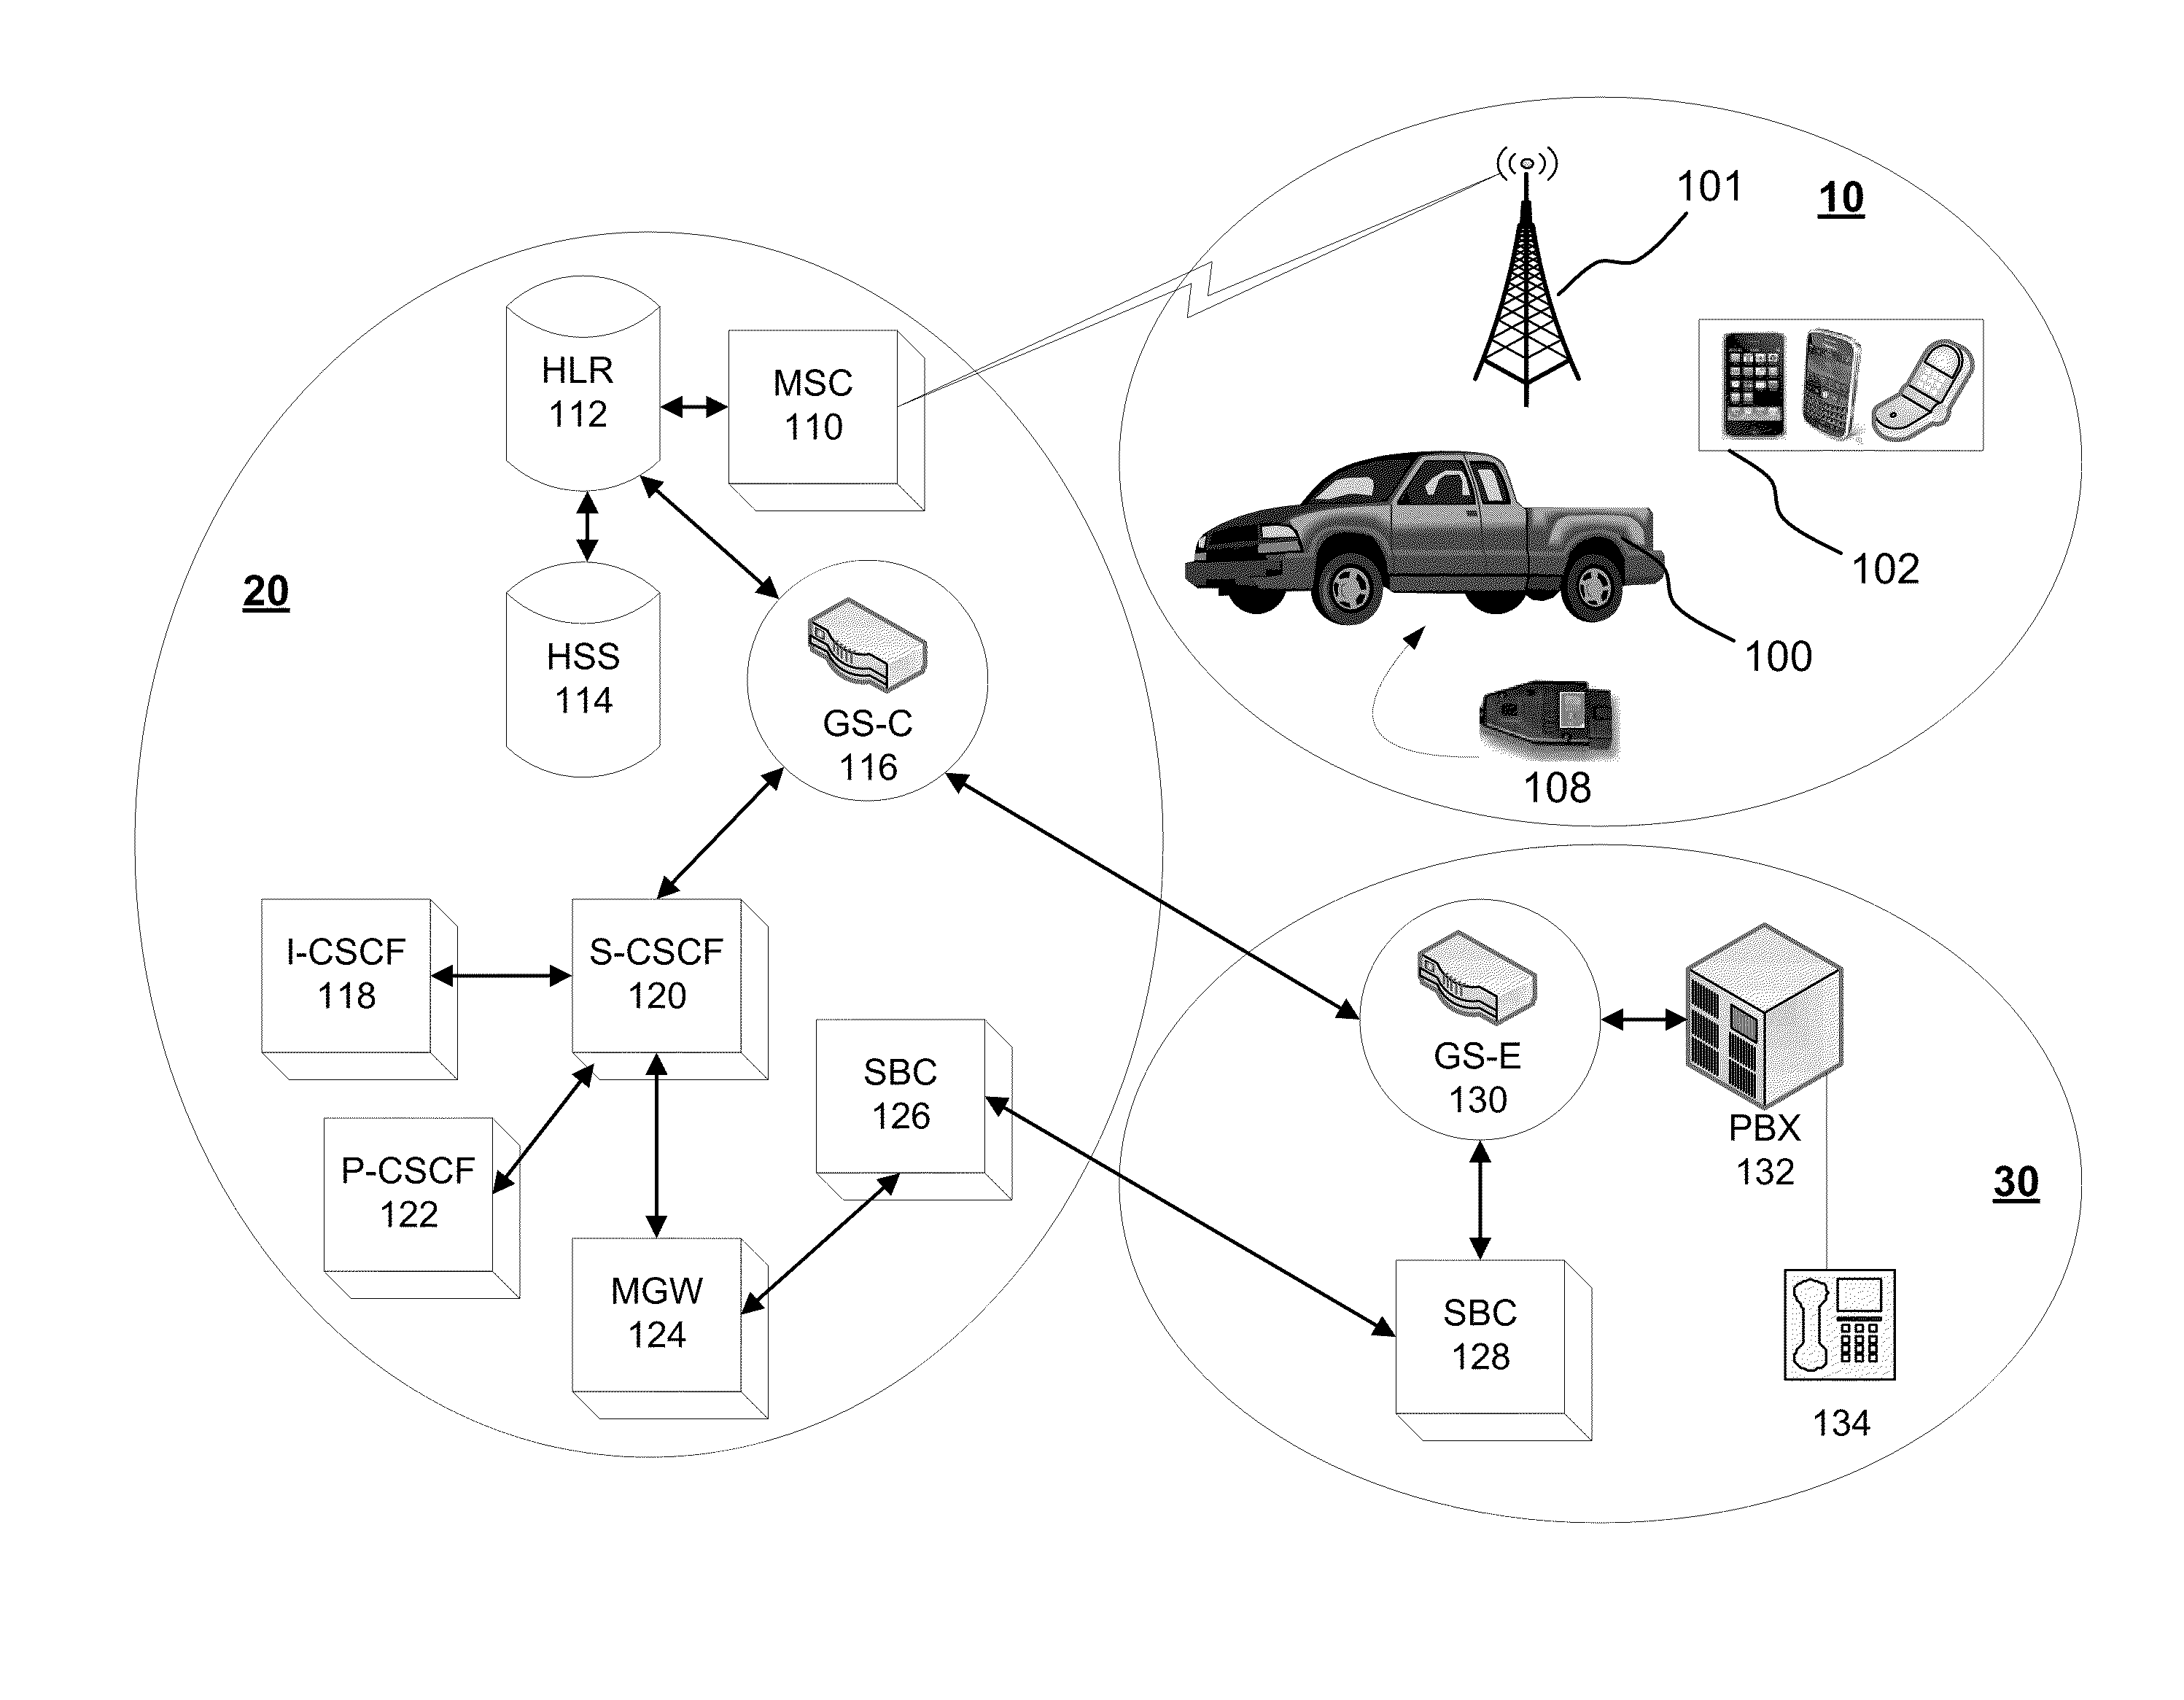 Controlling mobile device calls, text messages and data usage while operating a motor vehicle